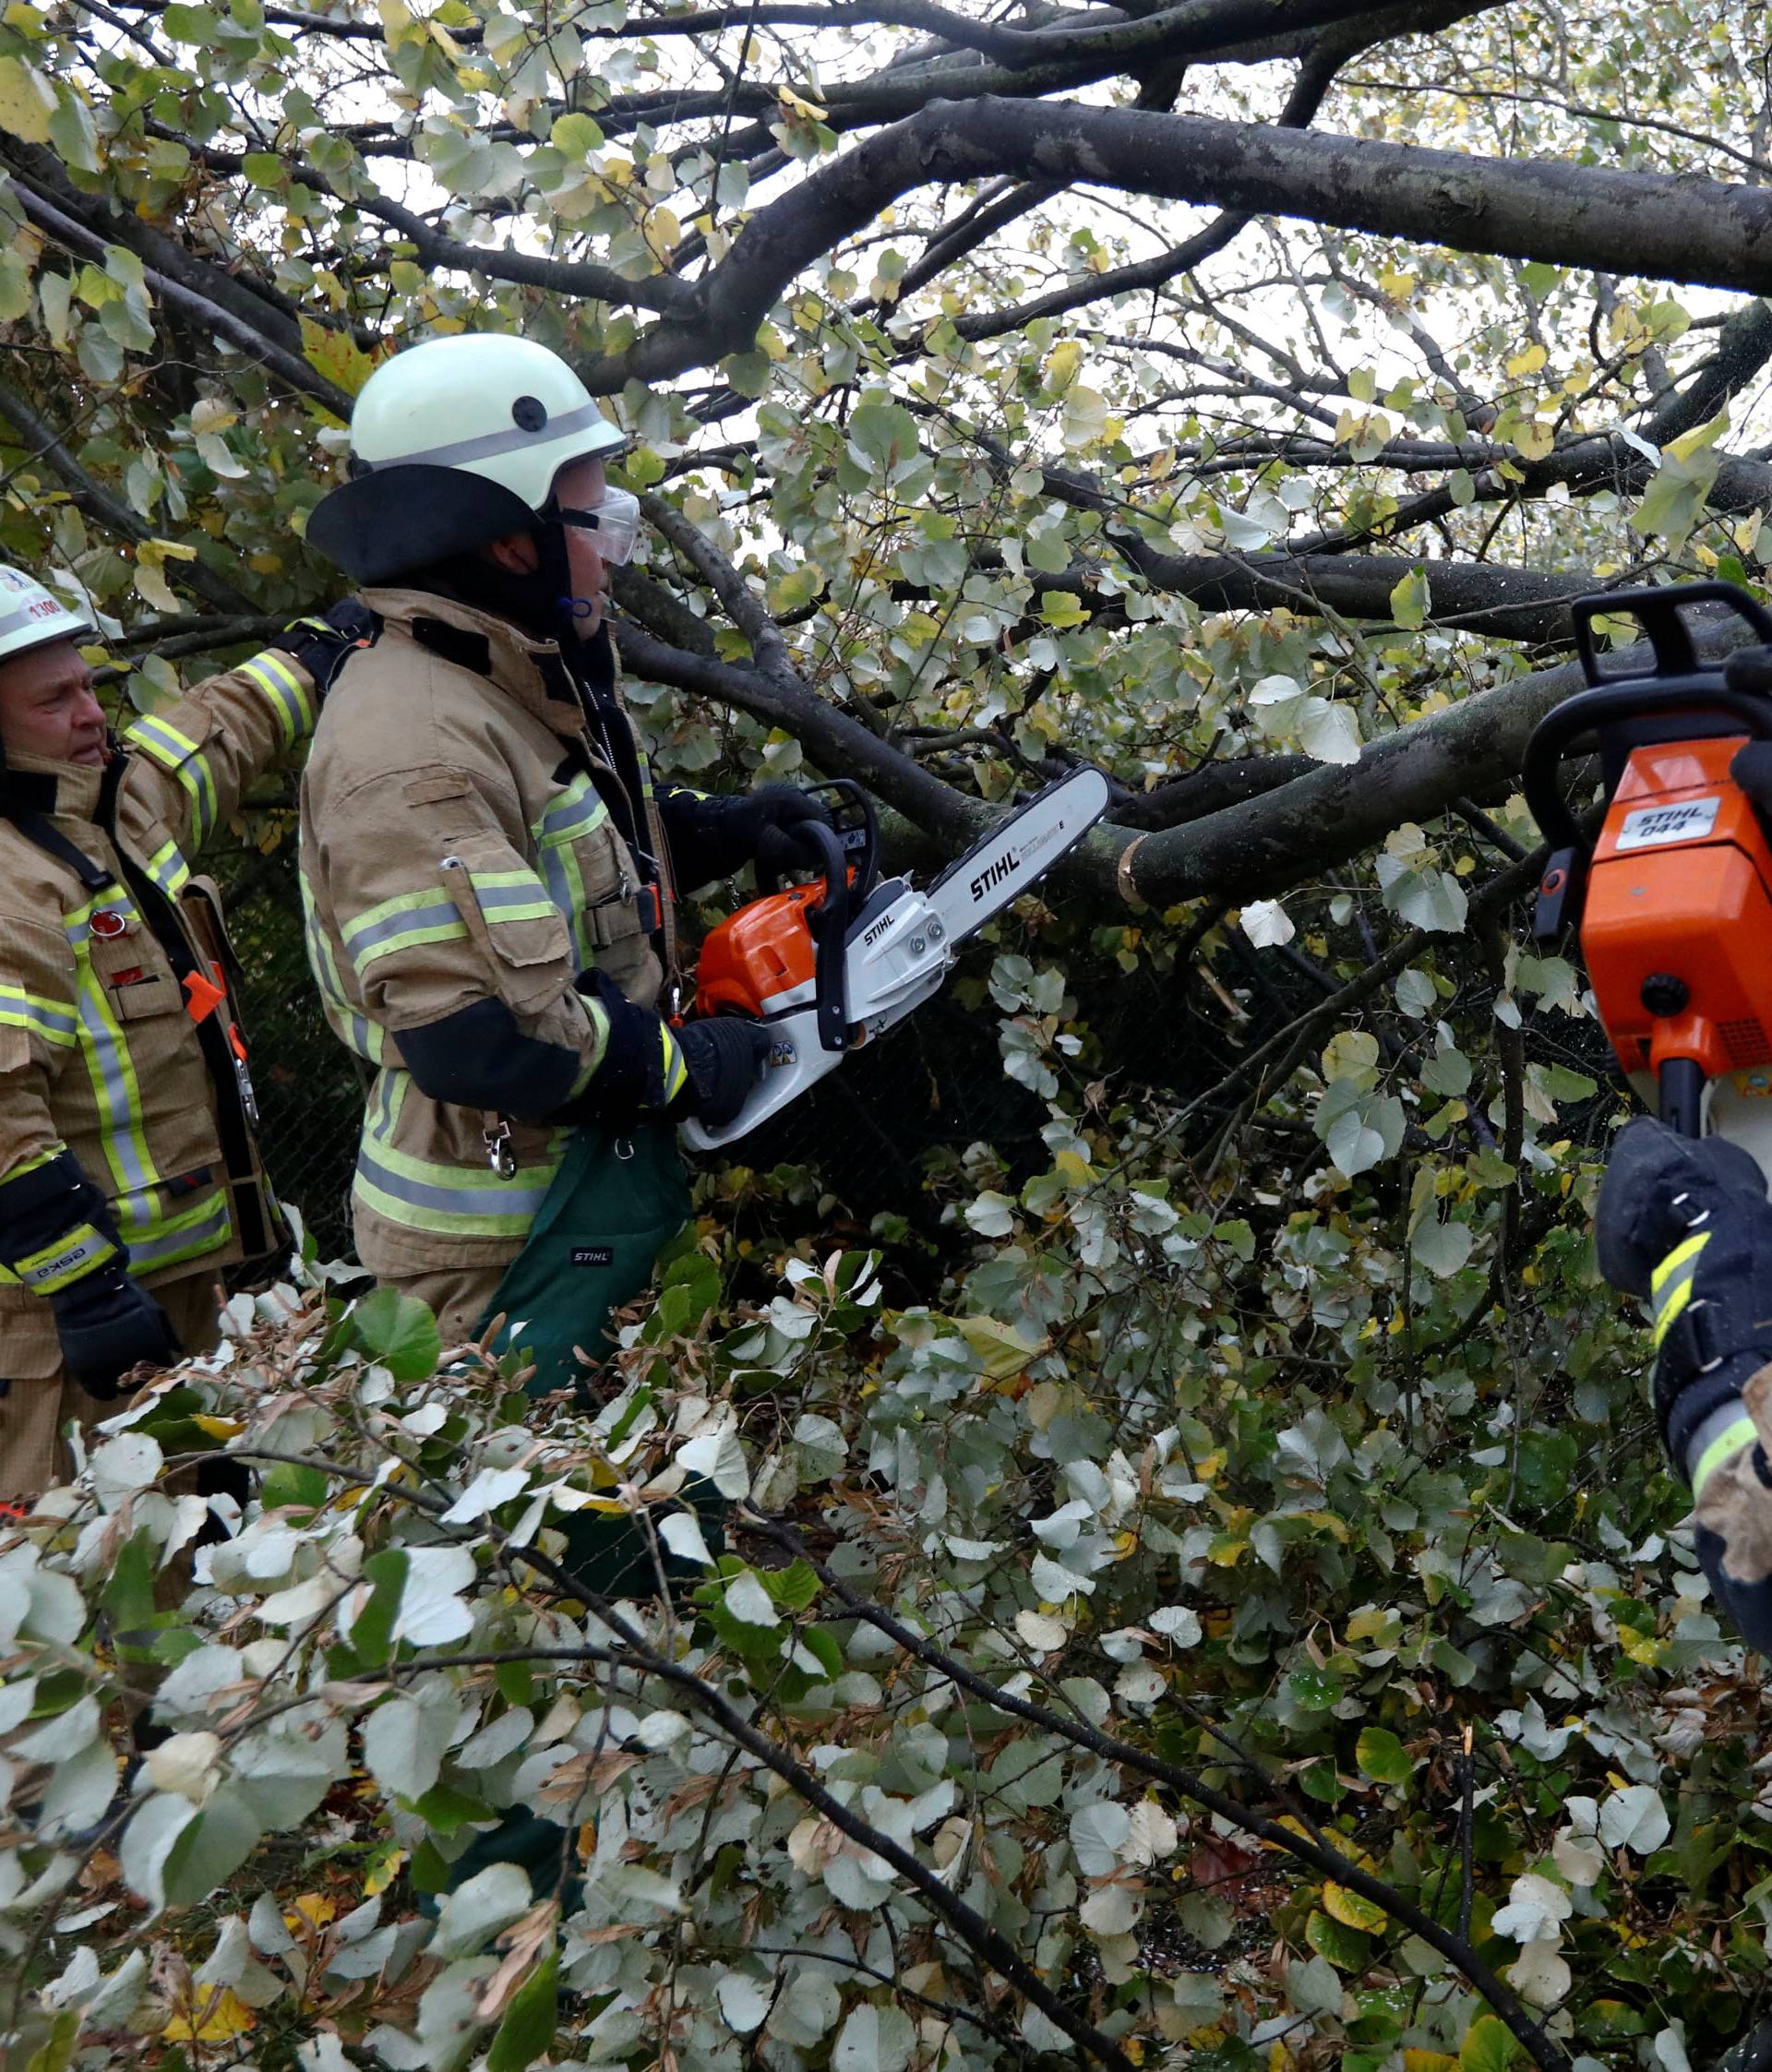 Firefighters work by a tree during stormy weather caused by a storm called "Herwart" in Berlin